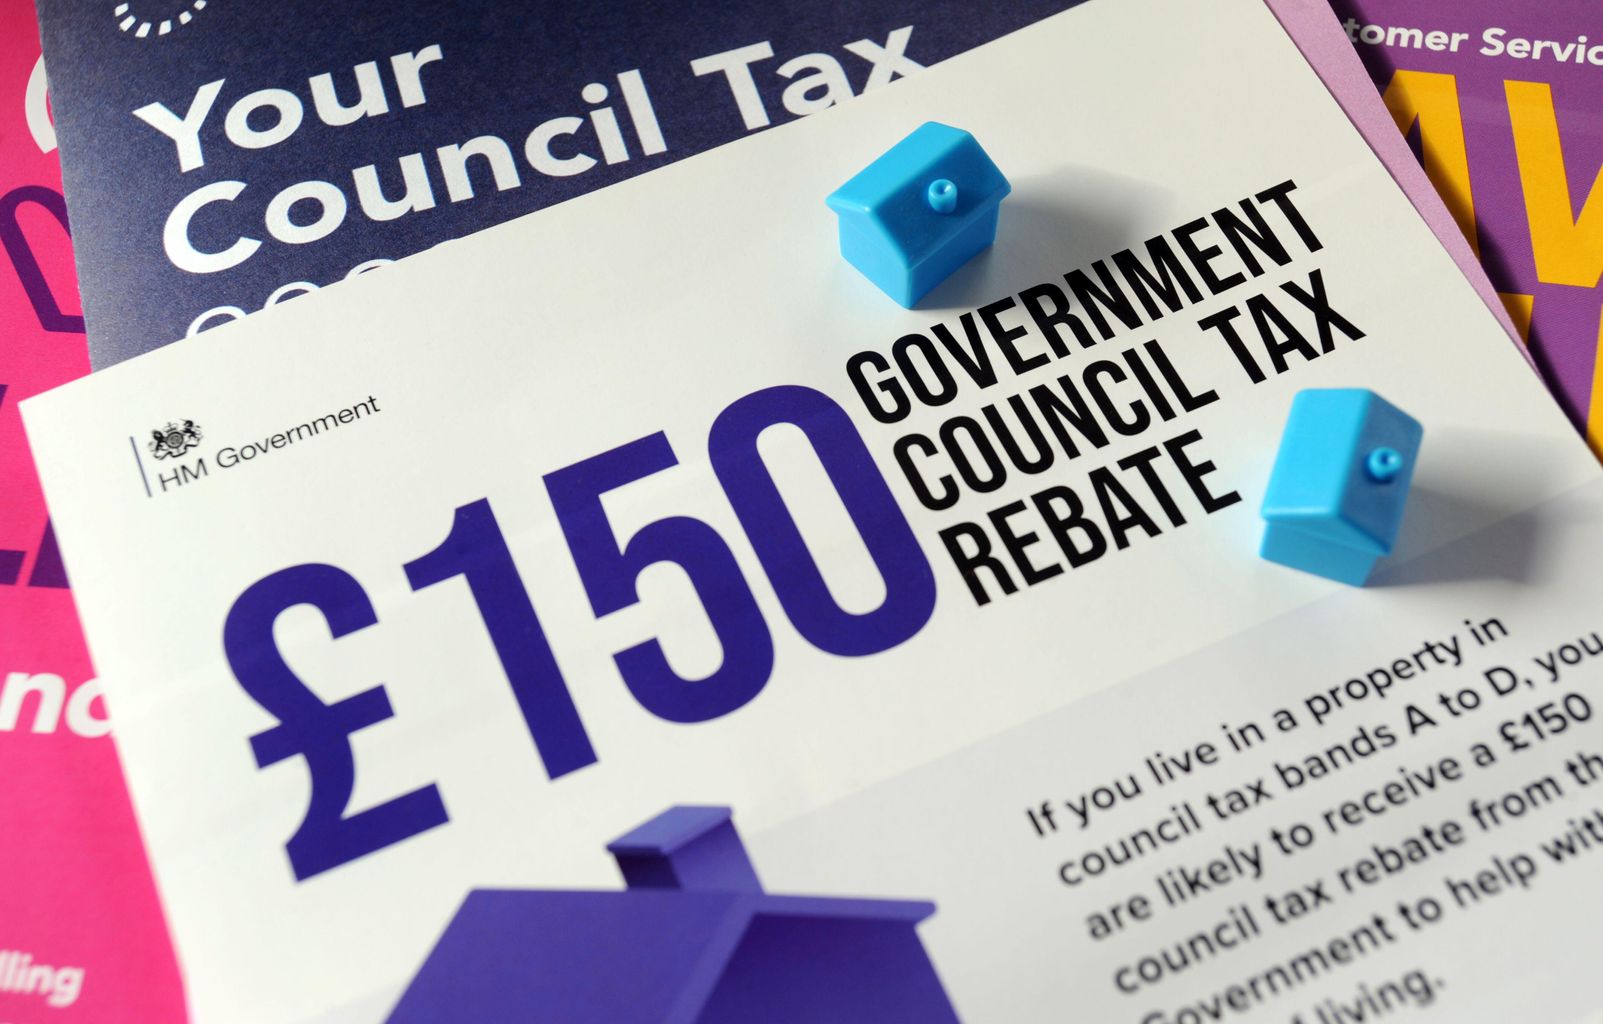 Council Tax Rebate For Parkinsons